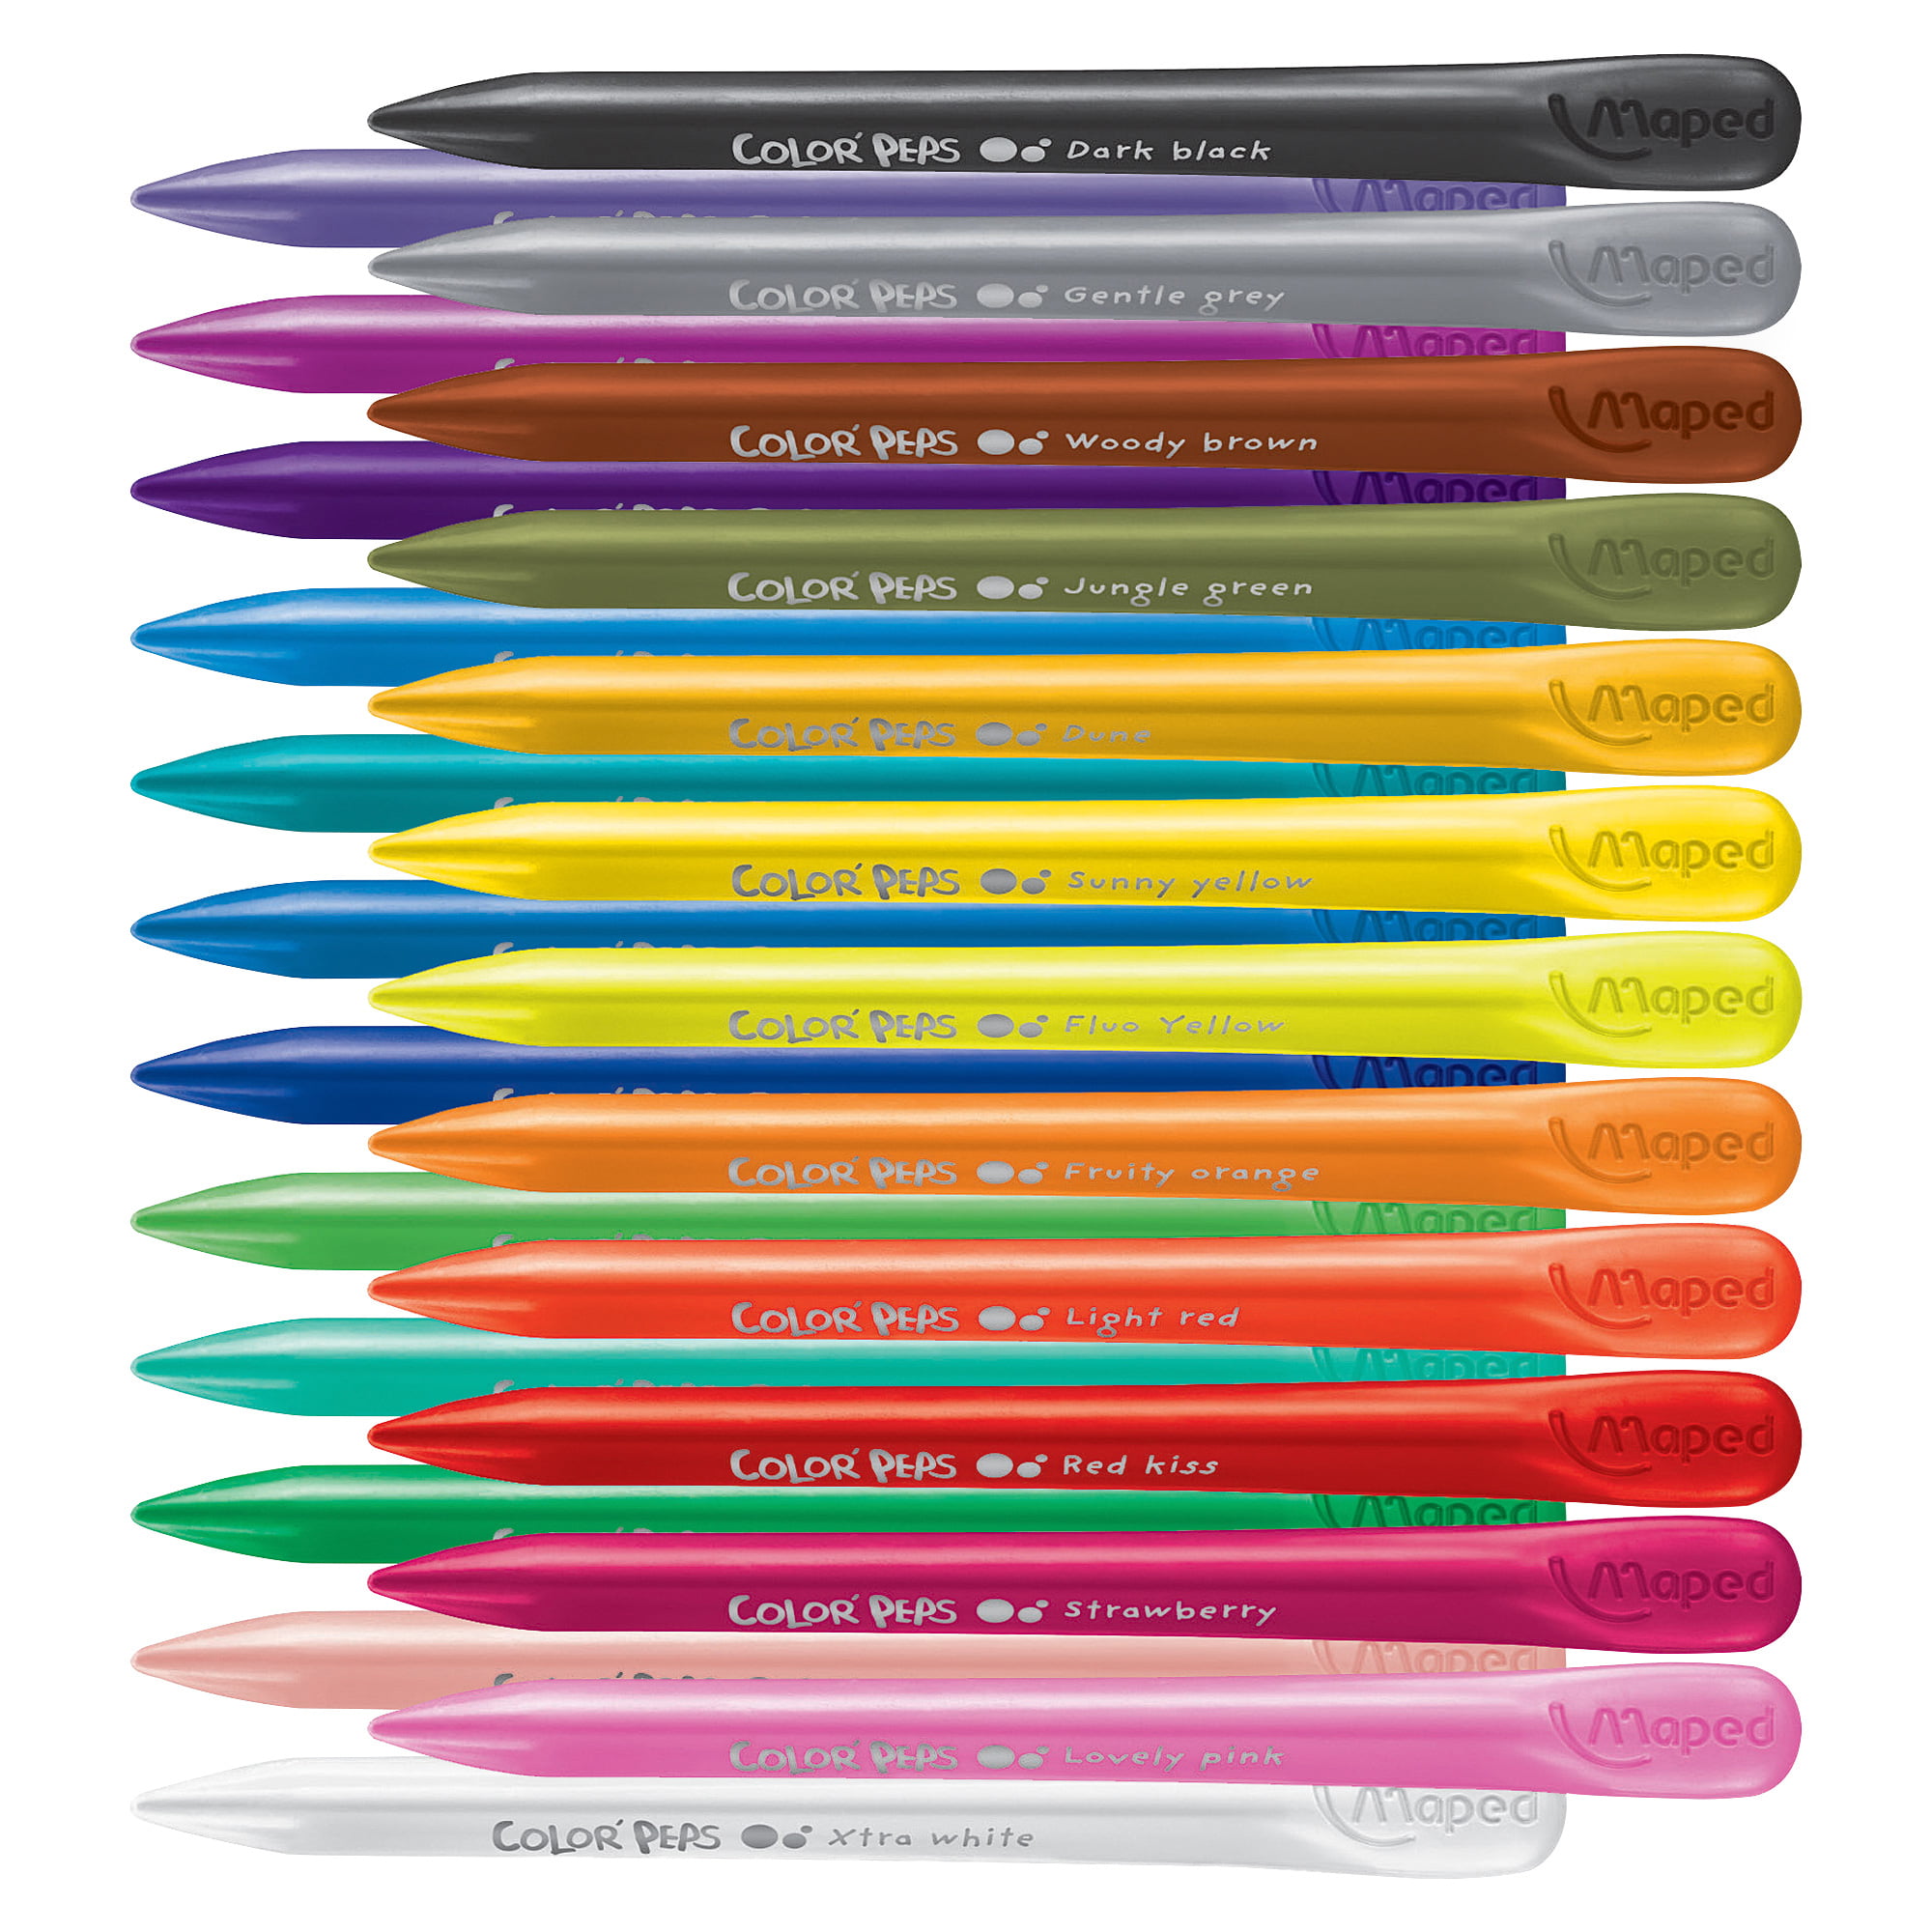 TeachersParadise - Maped Color'Peps My First PlastiClean Plastic Crayons,  Pack of 6 - MAP863806